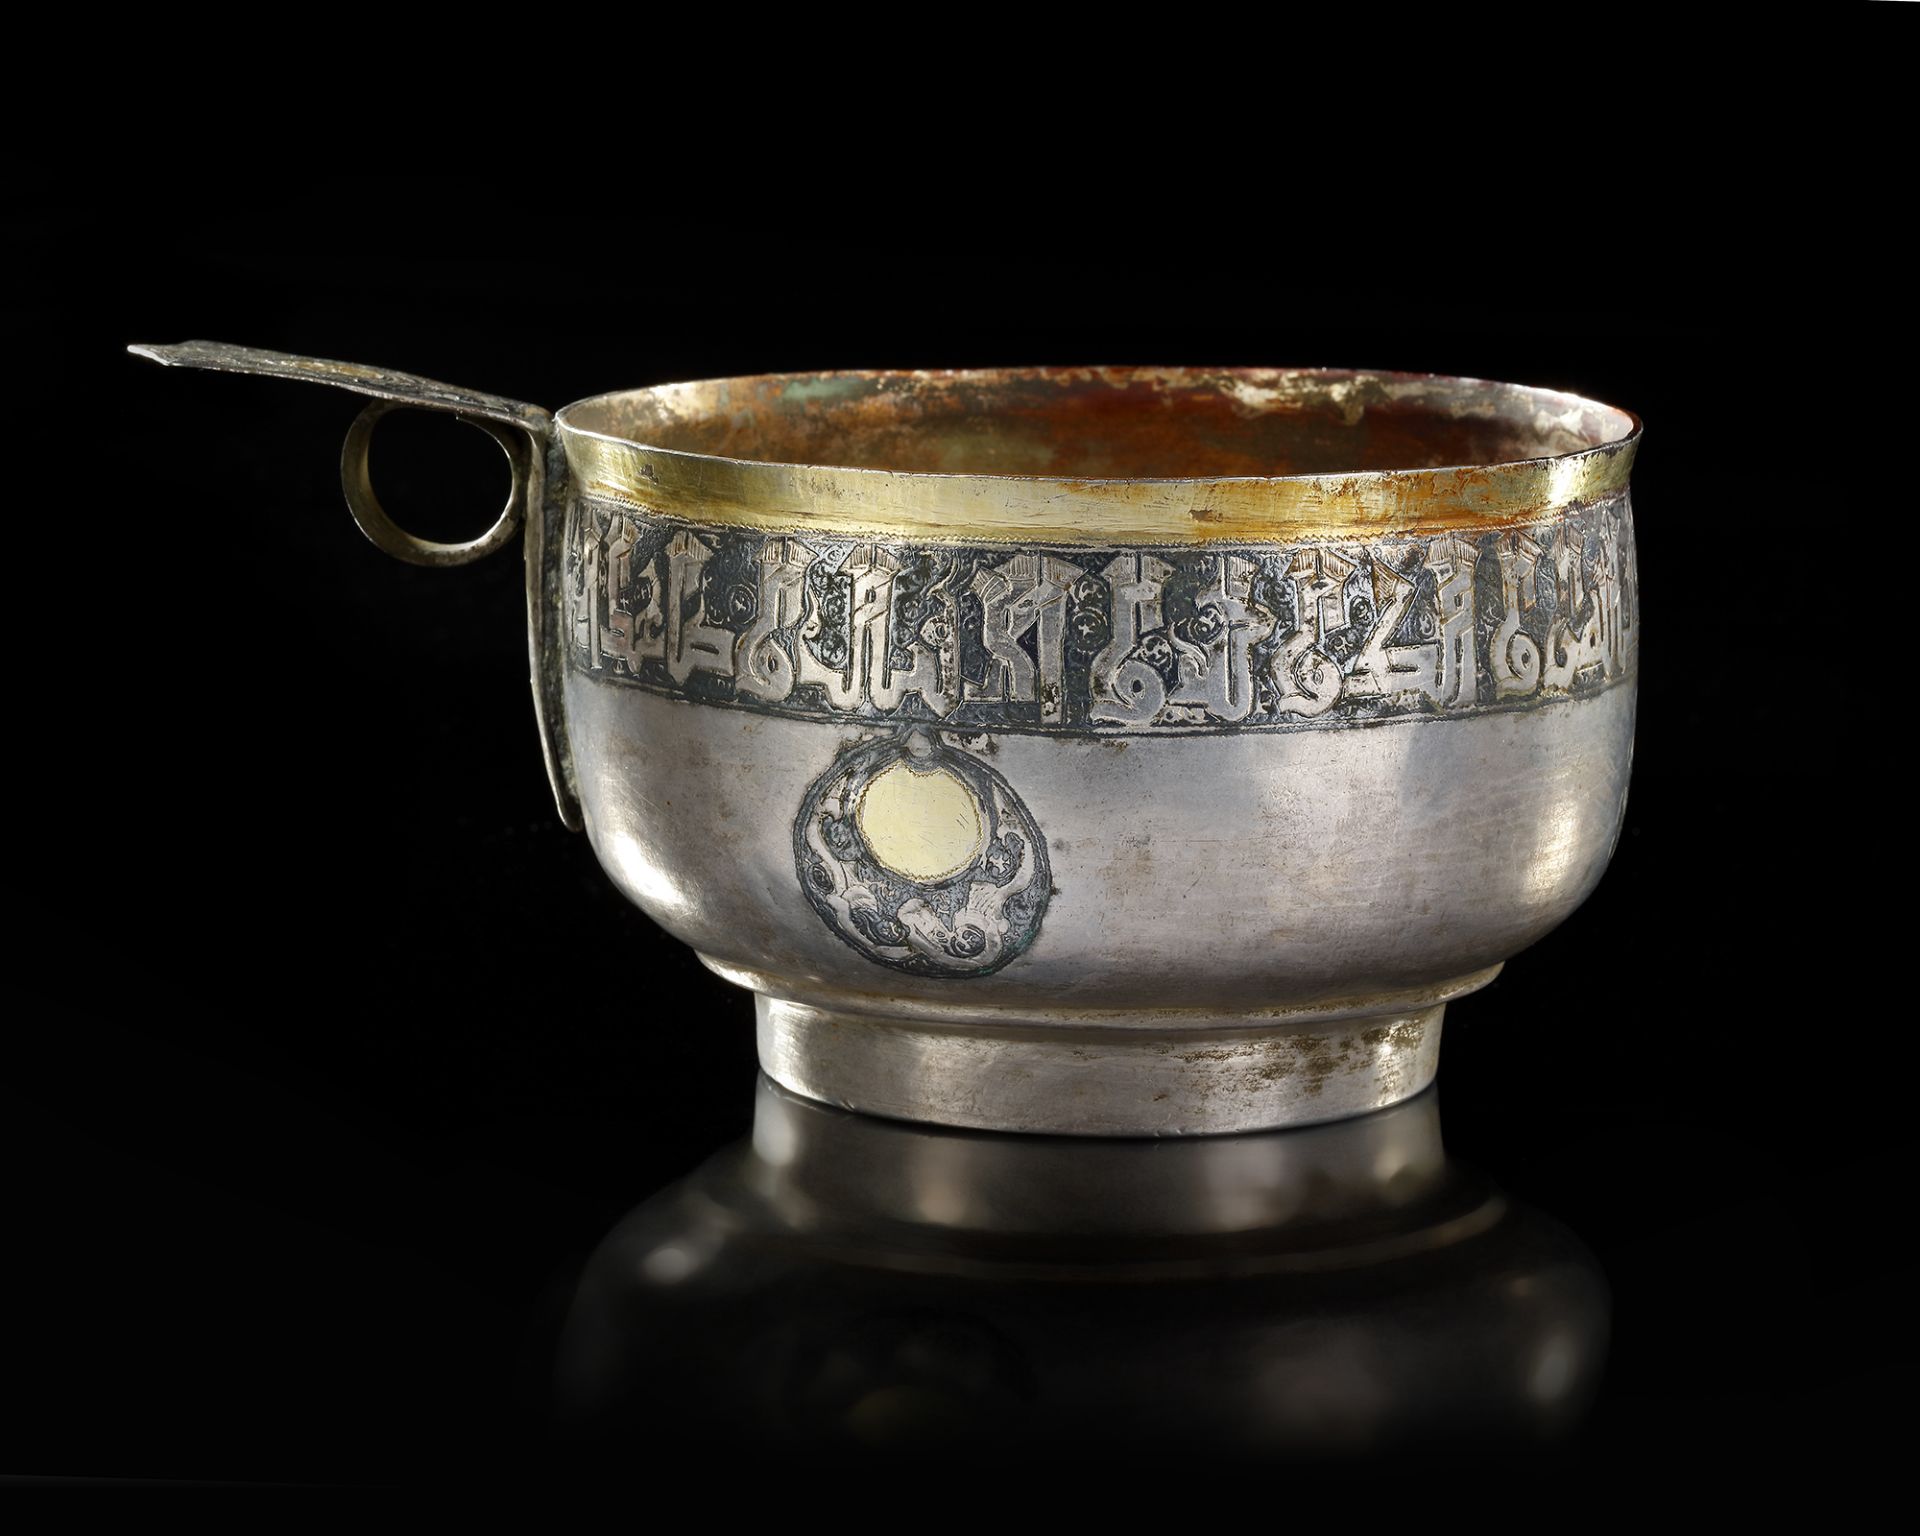 A RARE SILVER AND NIELLOED CUP WITH KUFIC INSCRIPTION, PERSIA OR CENTRAL ASIA, 11TH-12TH CENTURY - Image 7 of 34